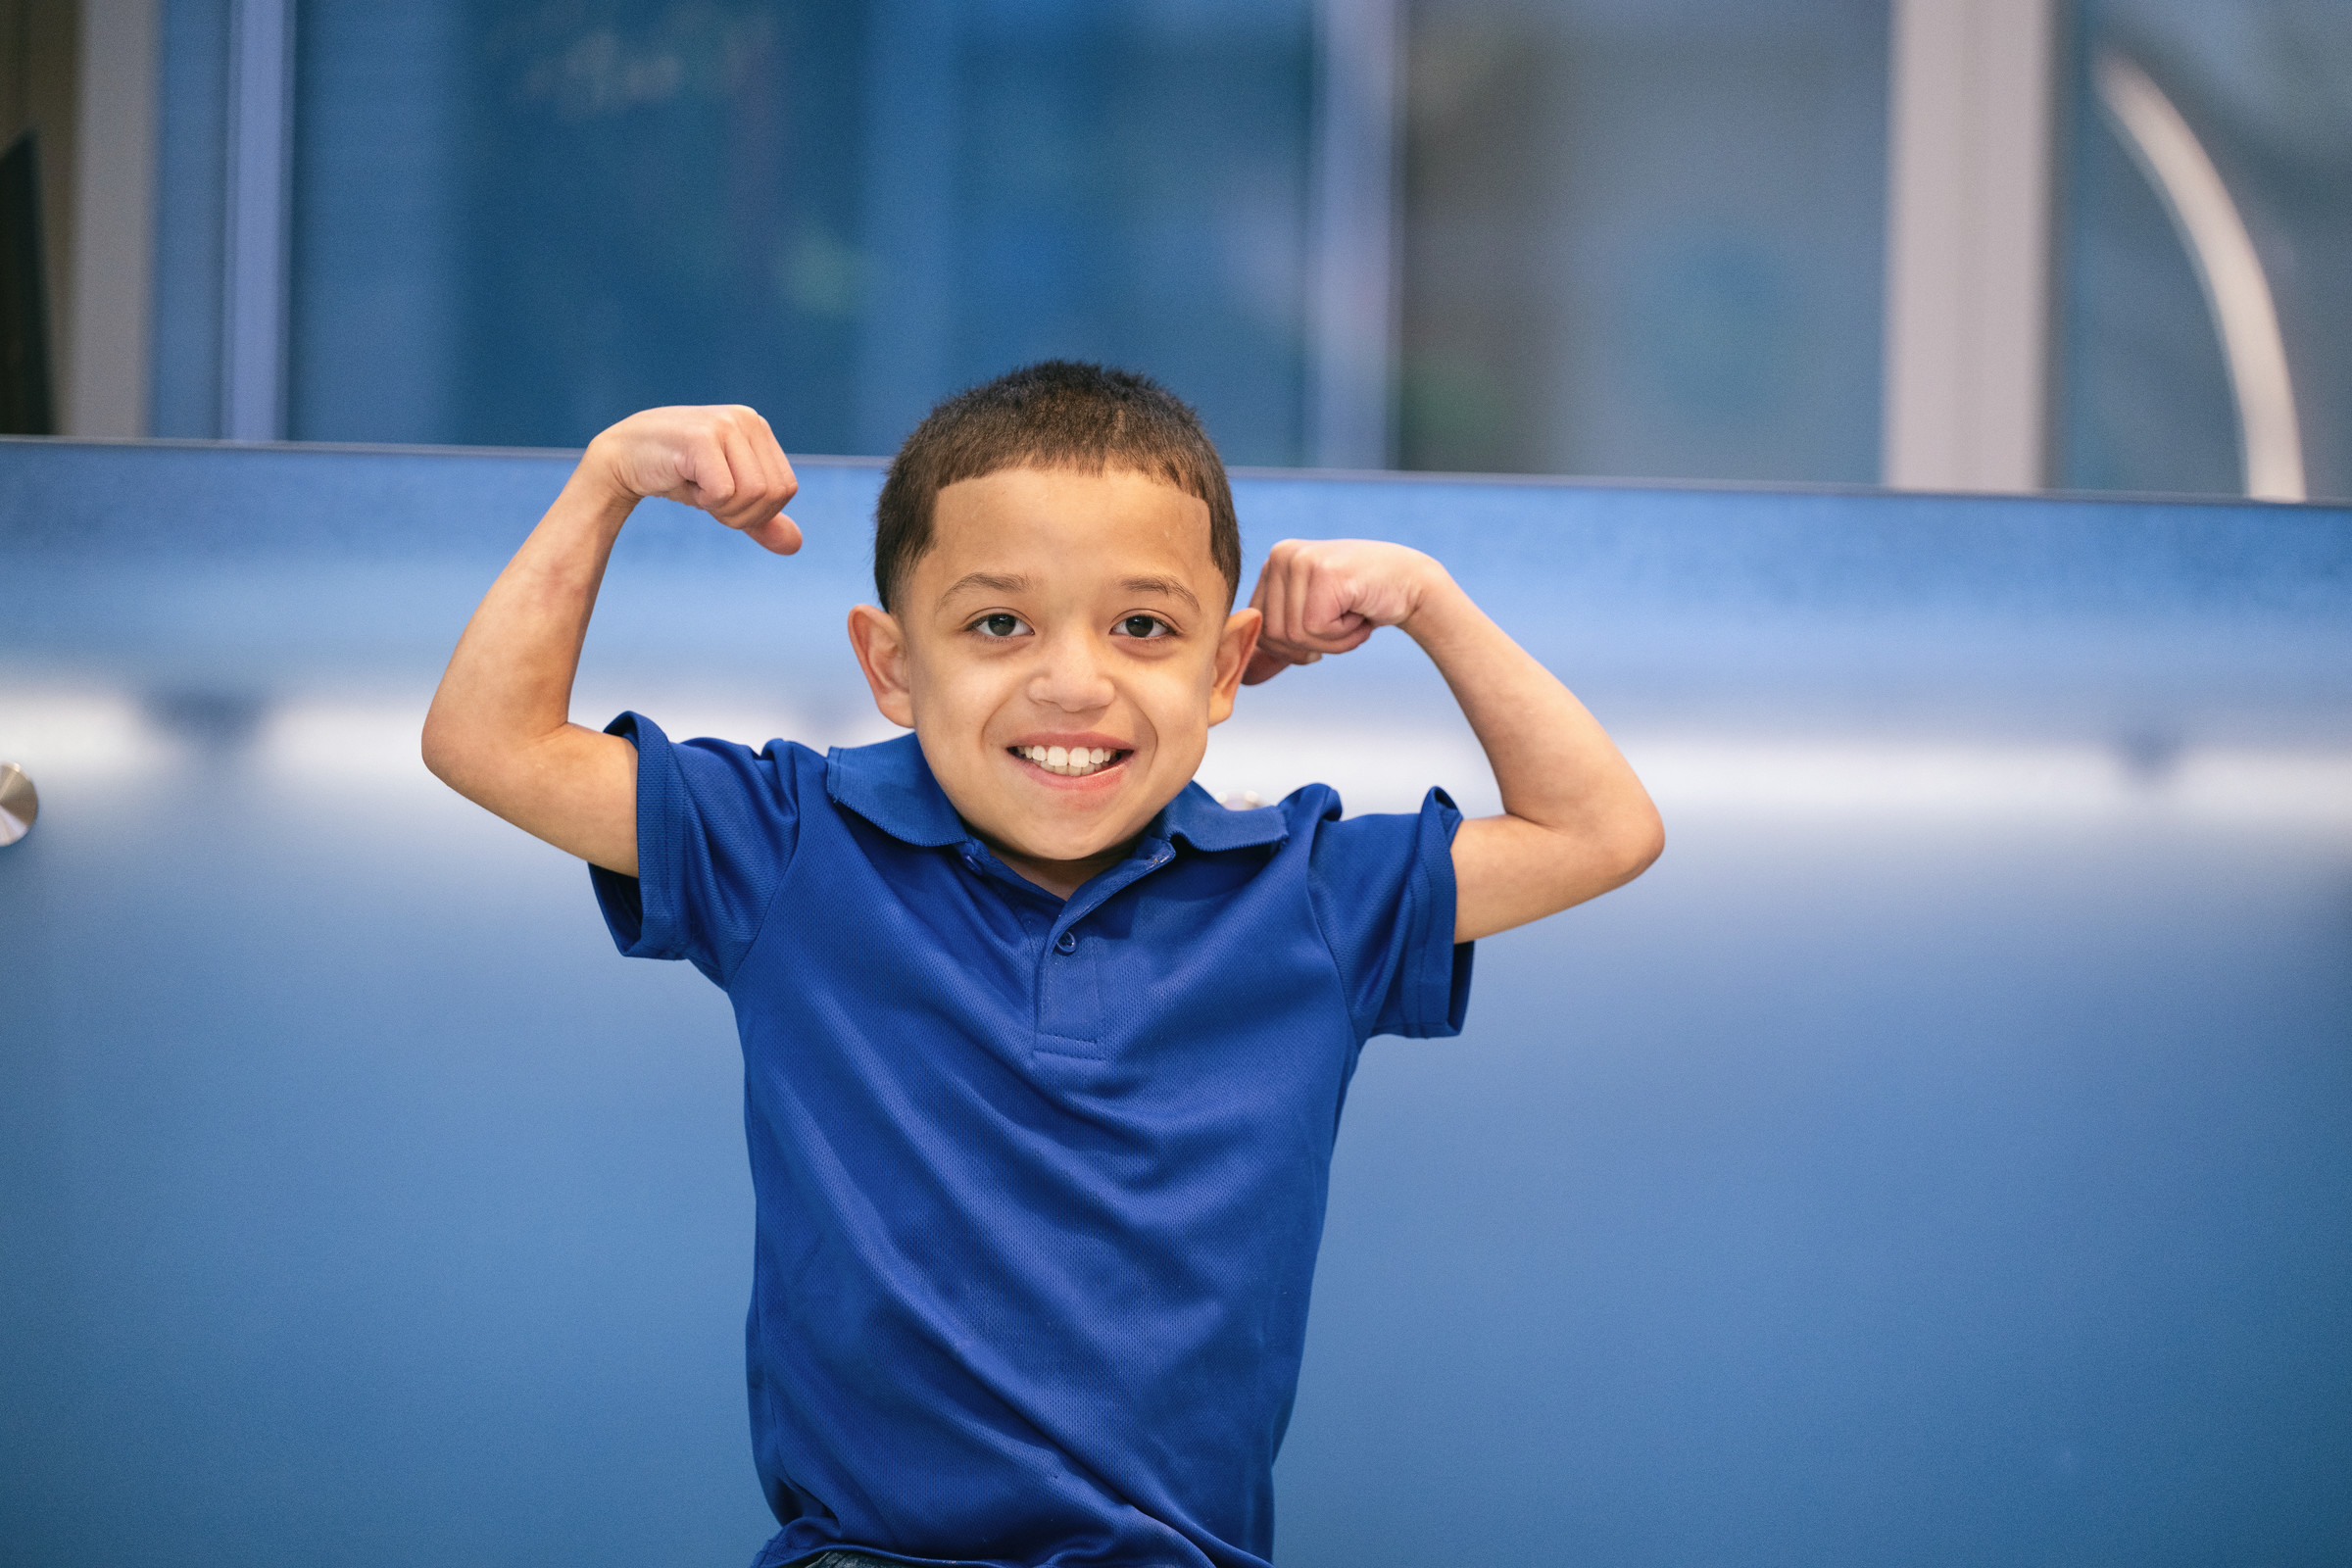 Young boy wearing blue shirt flexes his muscles for the camera